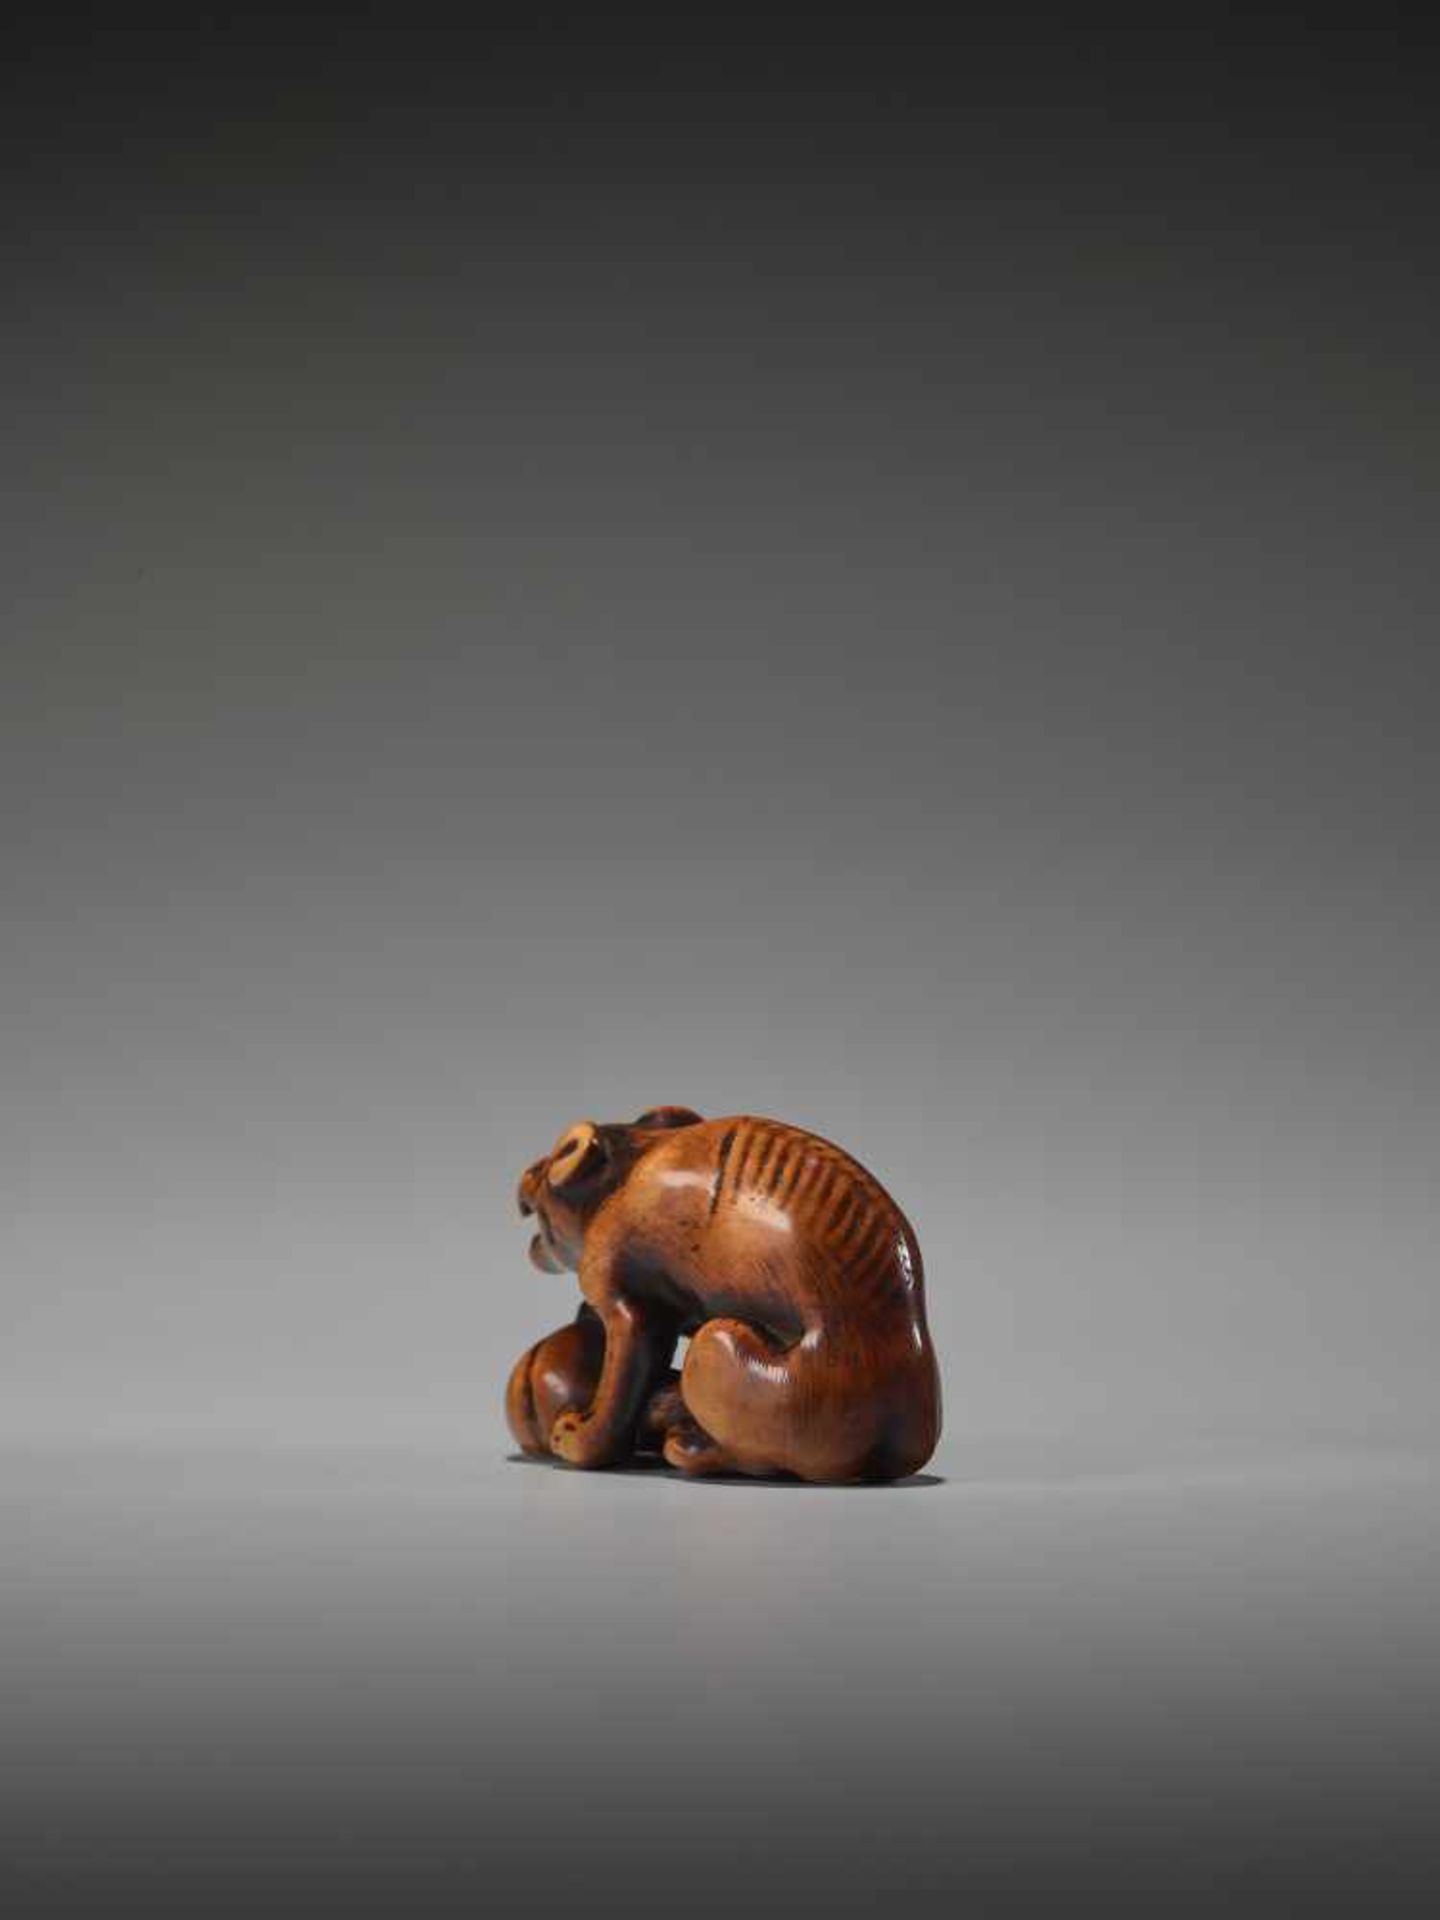 A POWERFUL WOOD NETSUKE OF A WOLF WITH A SKULL UnsignedJapan, 18th century, Edo period (1615-1868) - Image 7 of 9